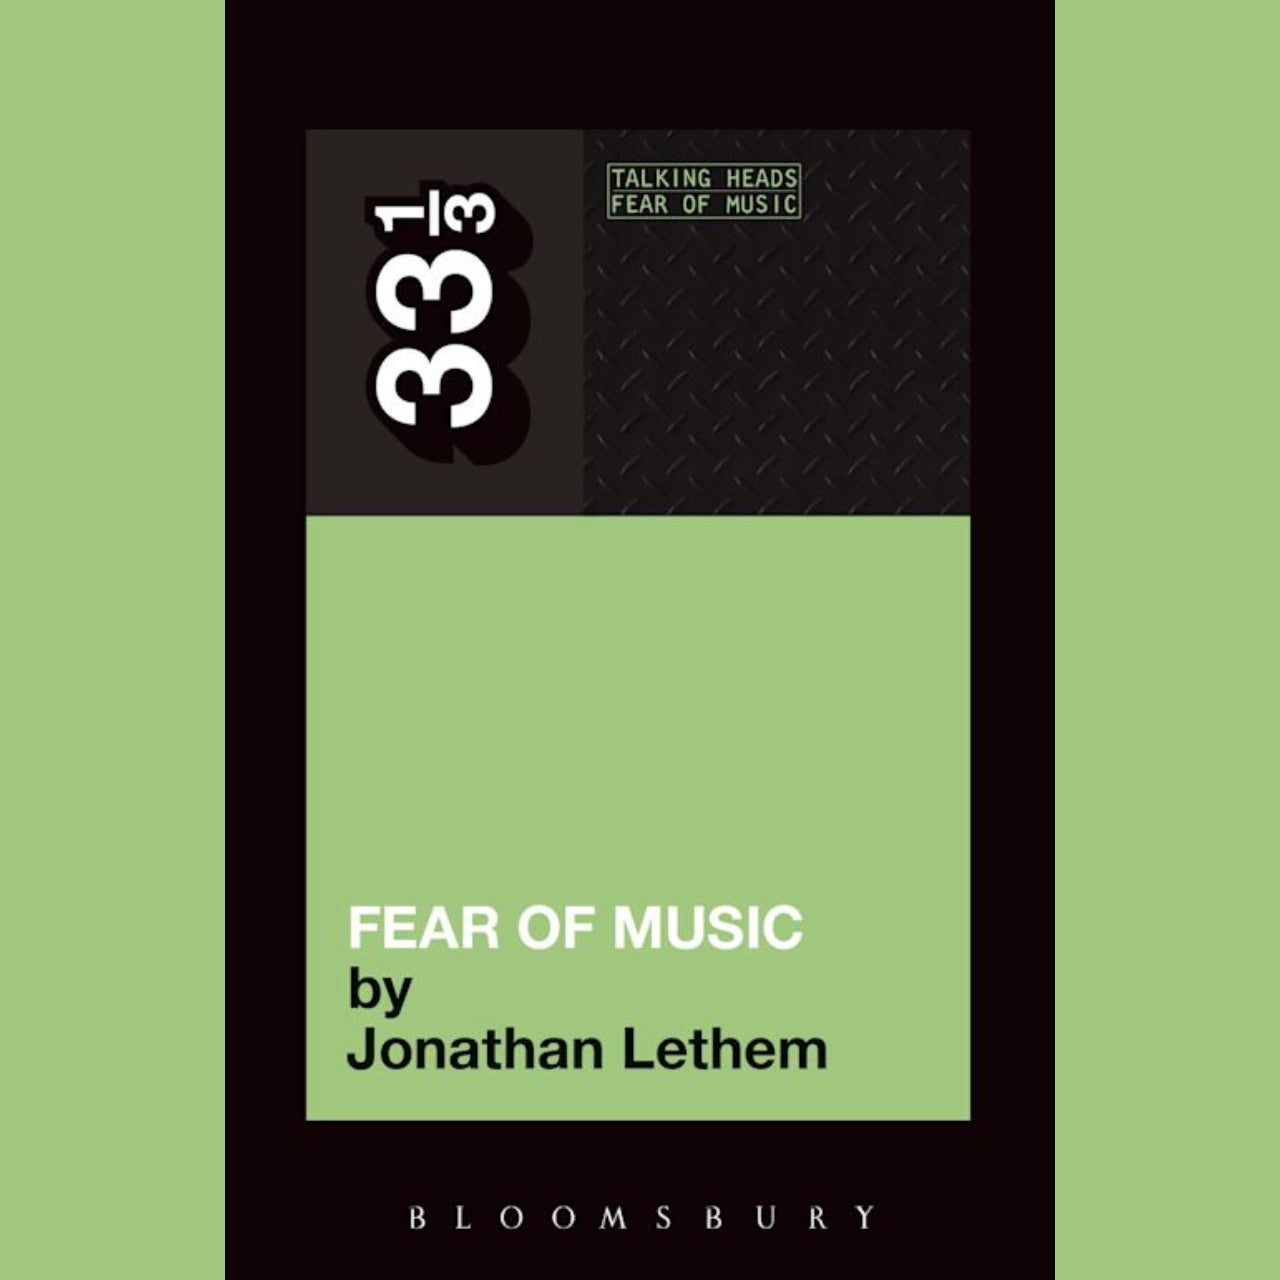 Jonathan Lethem - Talking Heads' Fear of Music | Buy the book